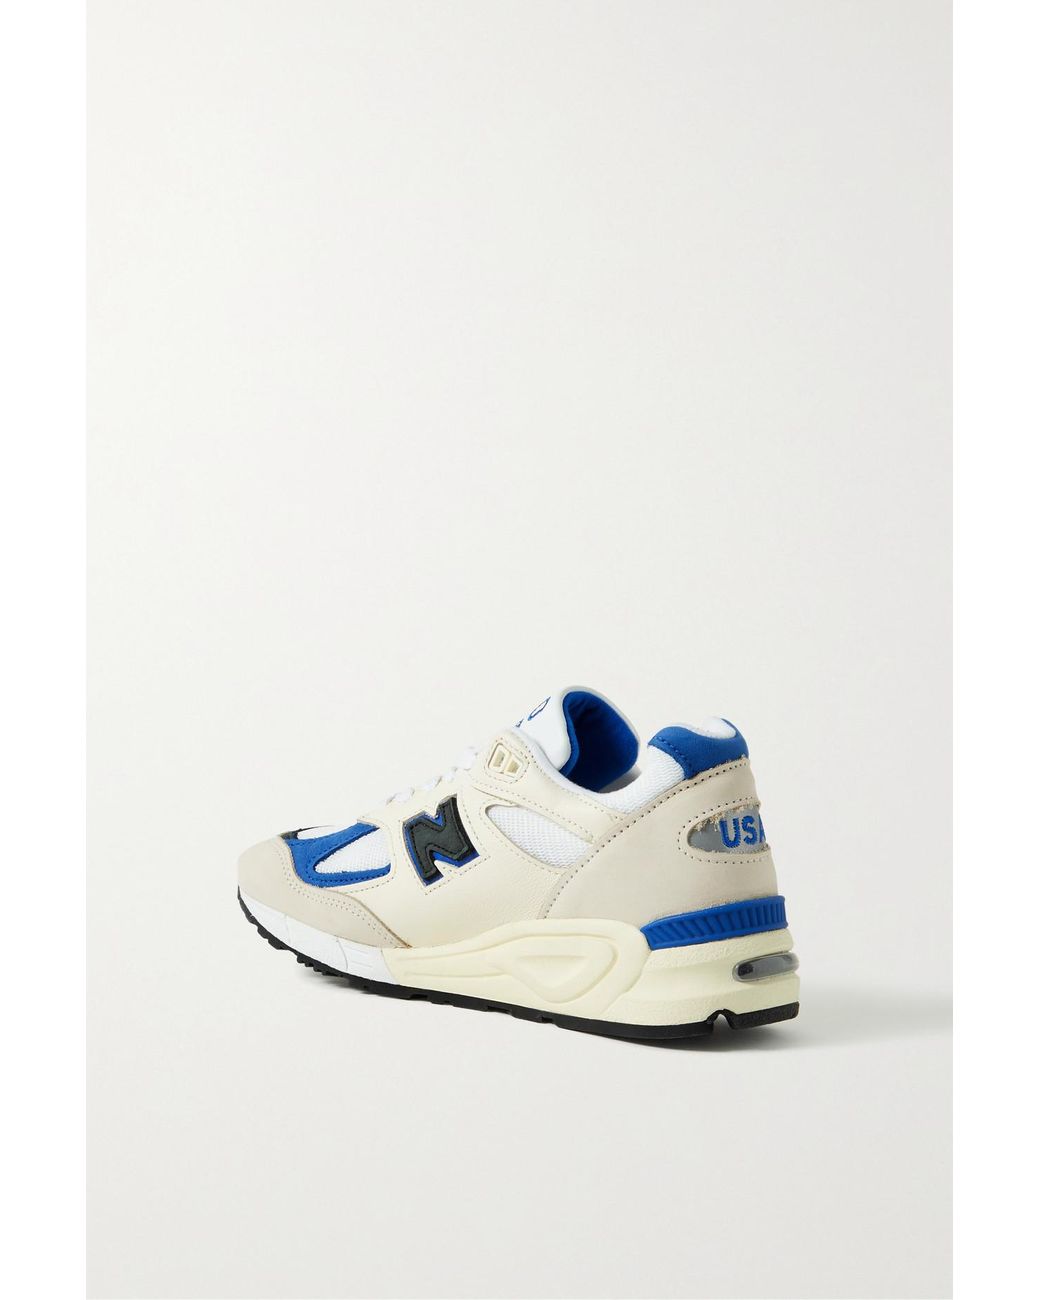 Documento cocinar una comida Cambiarse de ropa New Balance 990 V2 Leather And Suede-trimmed Mesh Sneakers in Blue | Lyst